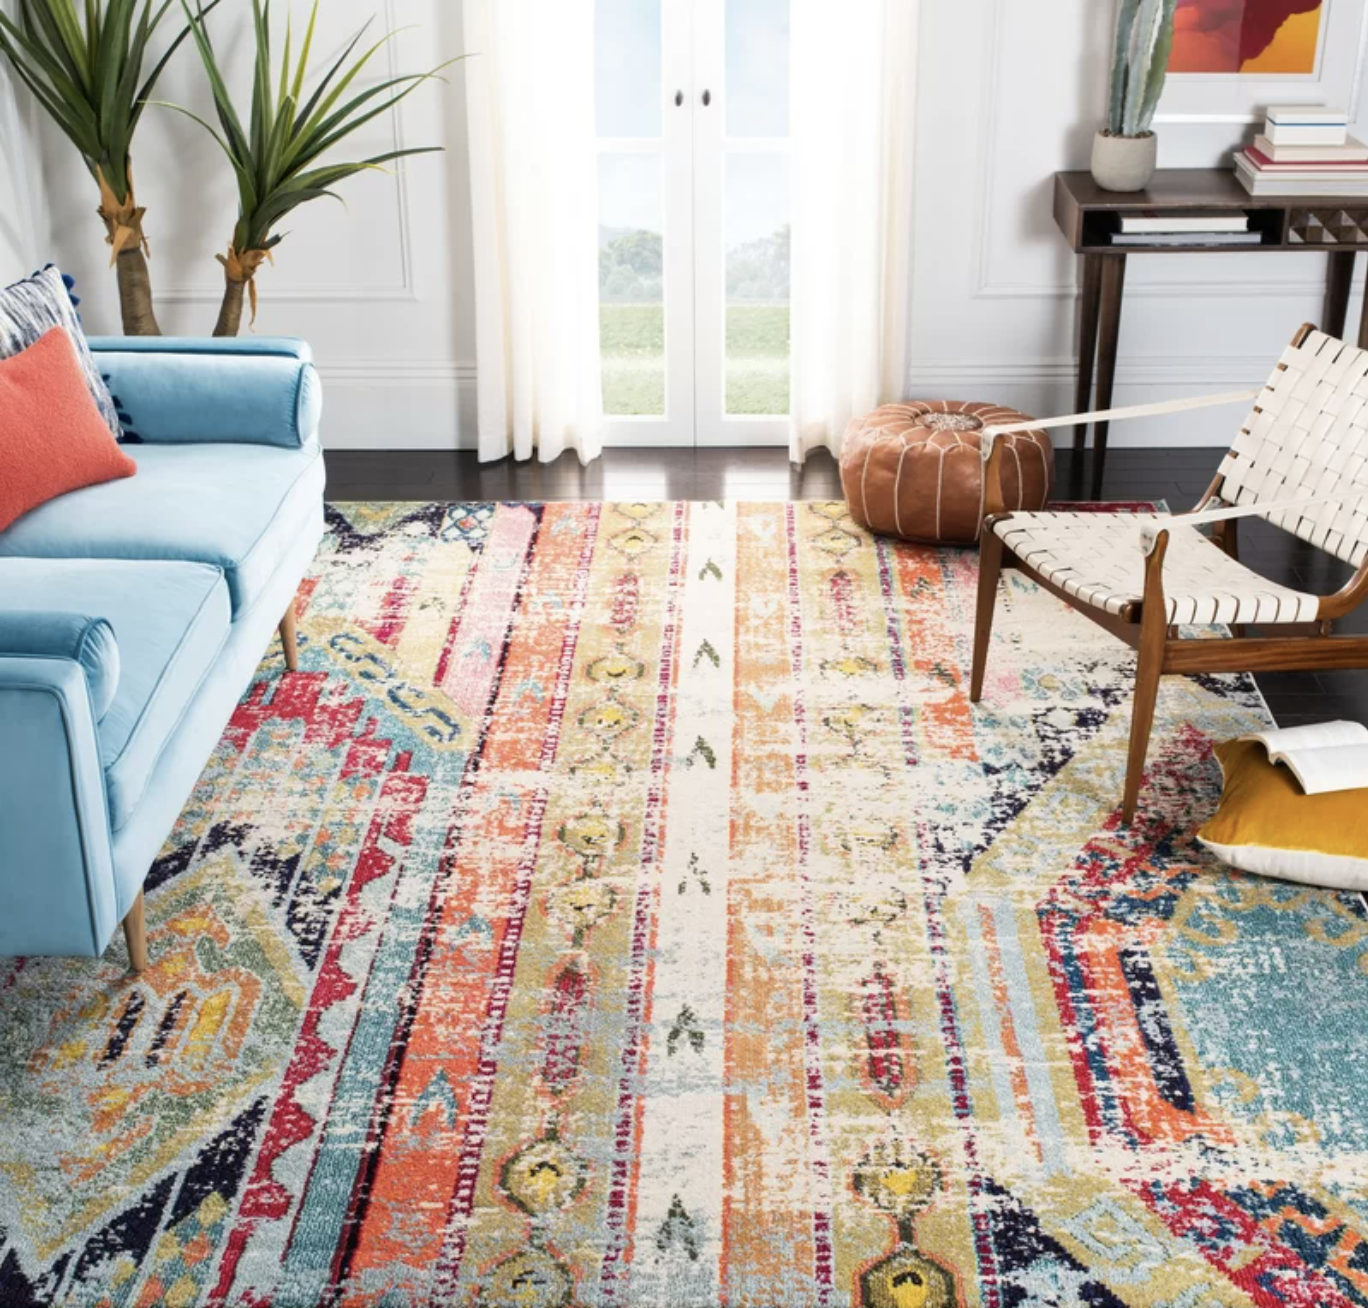 A vibrantly colored rug is shown